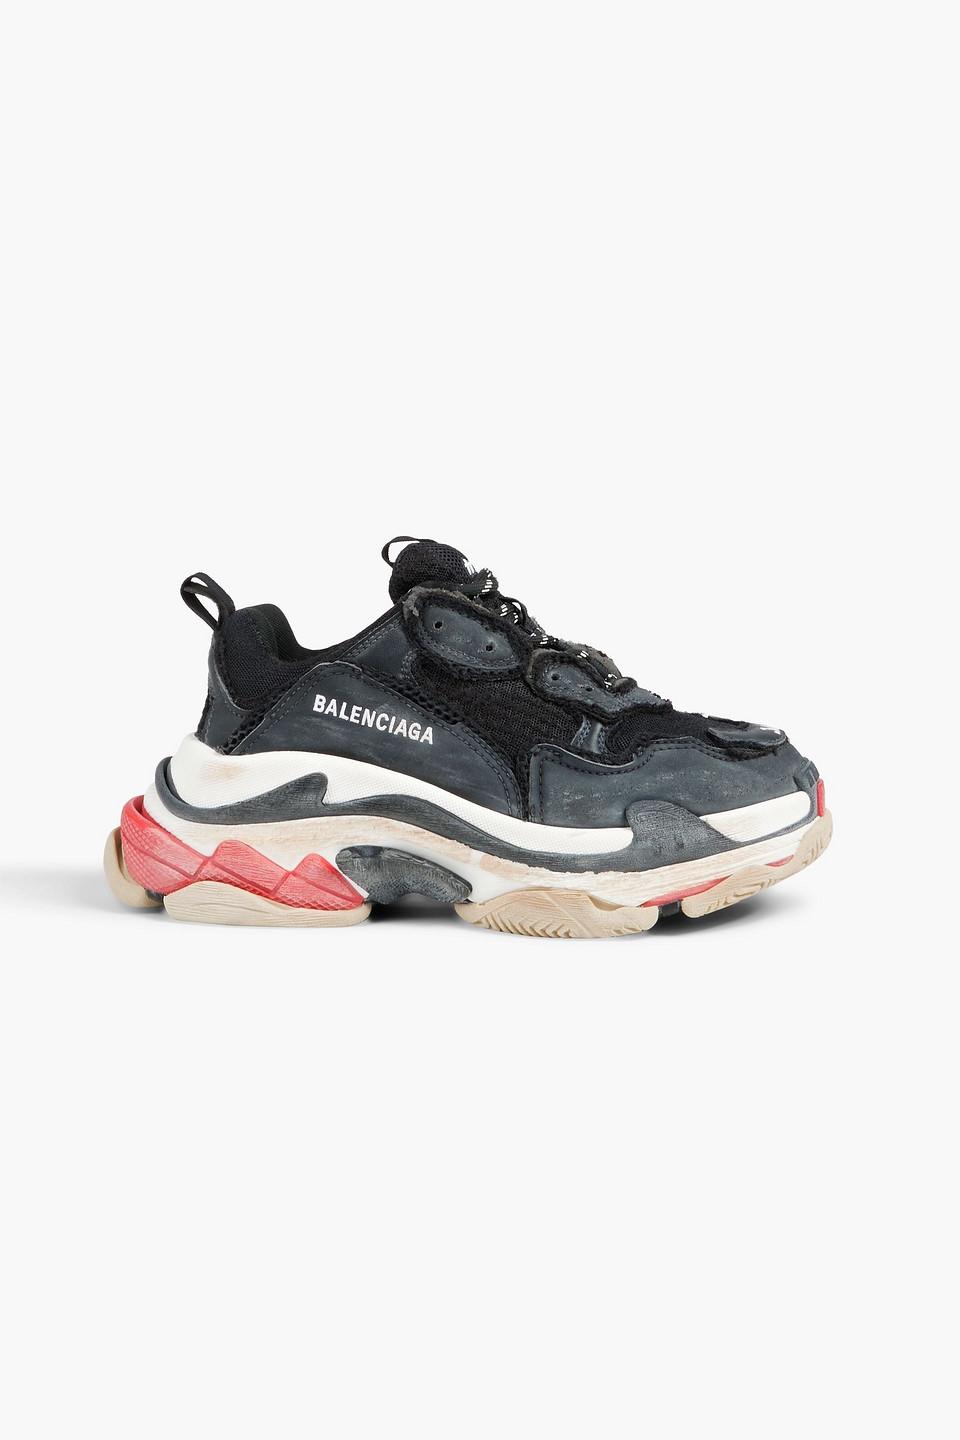 Balenciaga Triple S Distressed Leather And Mesh Sneakers in Black | Lyst